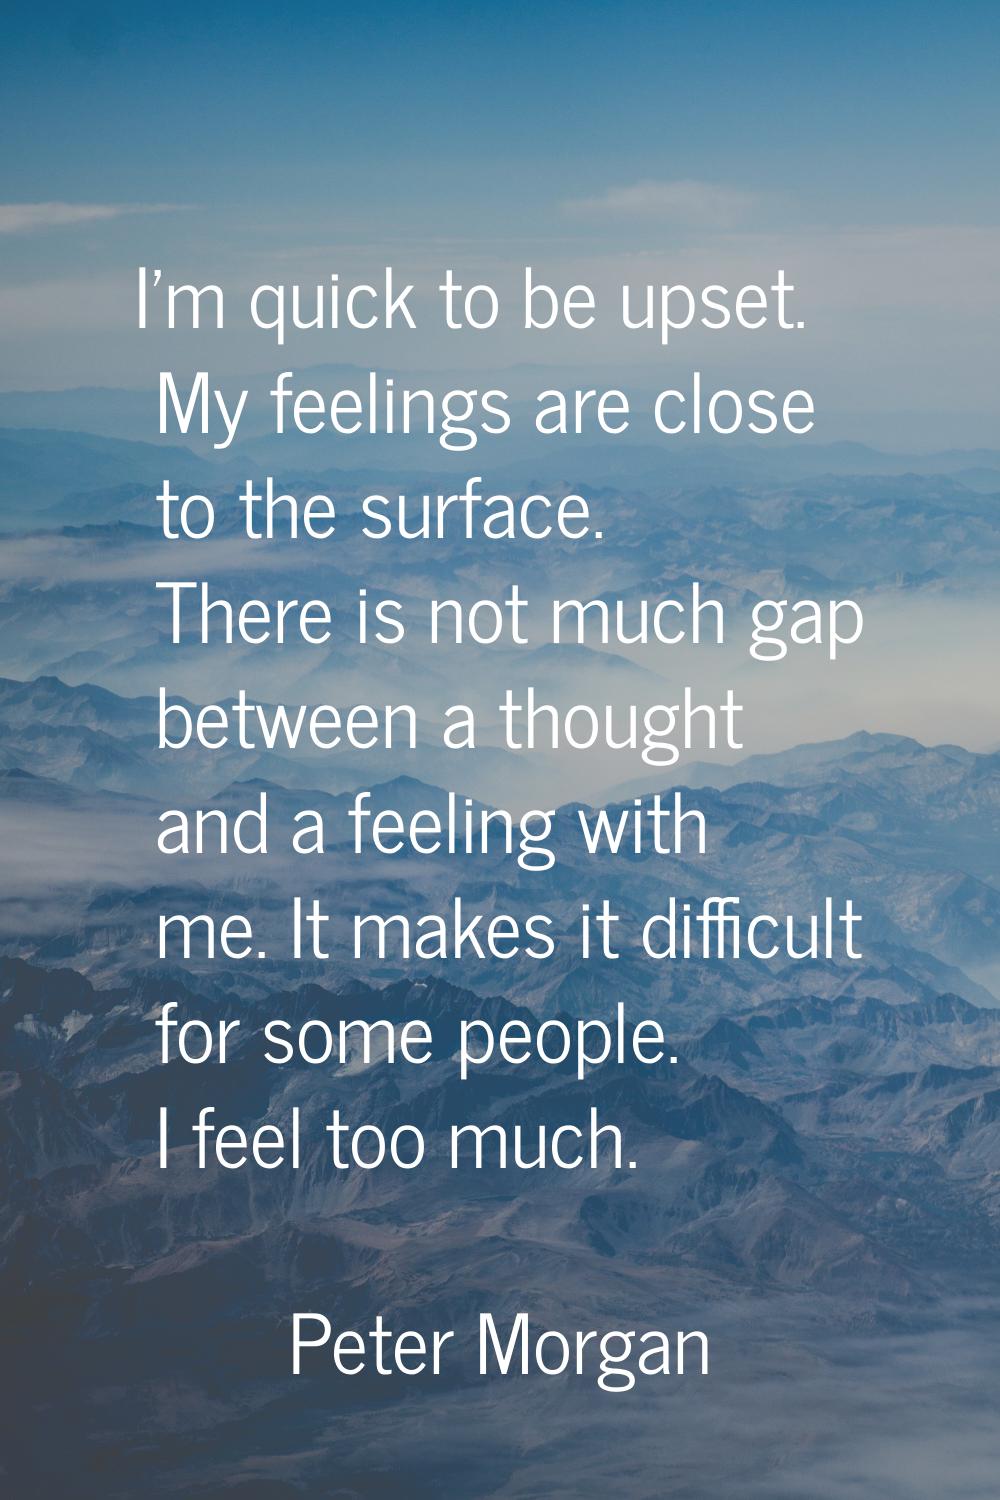 I'm quick to be upset. My feelings are close to the surface. There is not much gap between a though